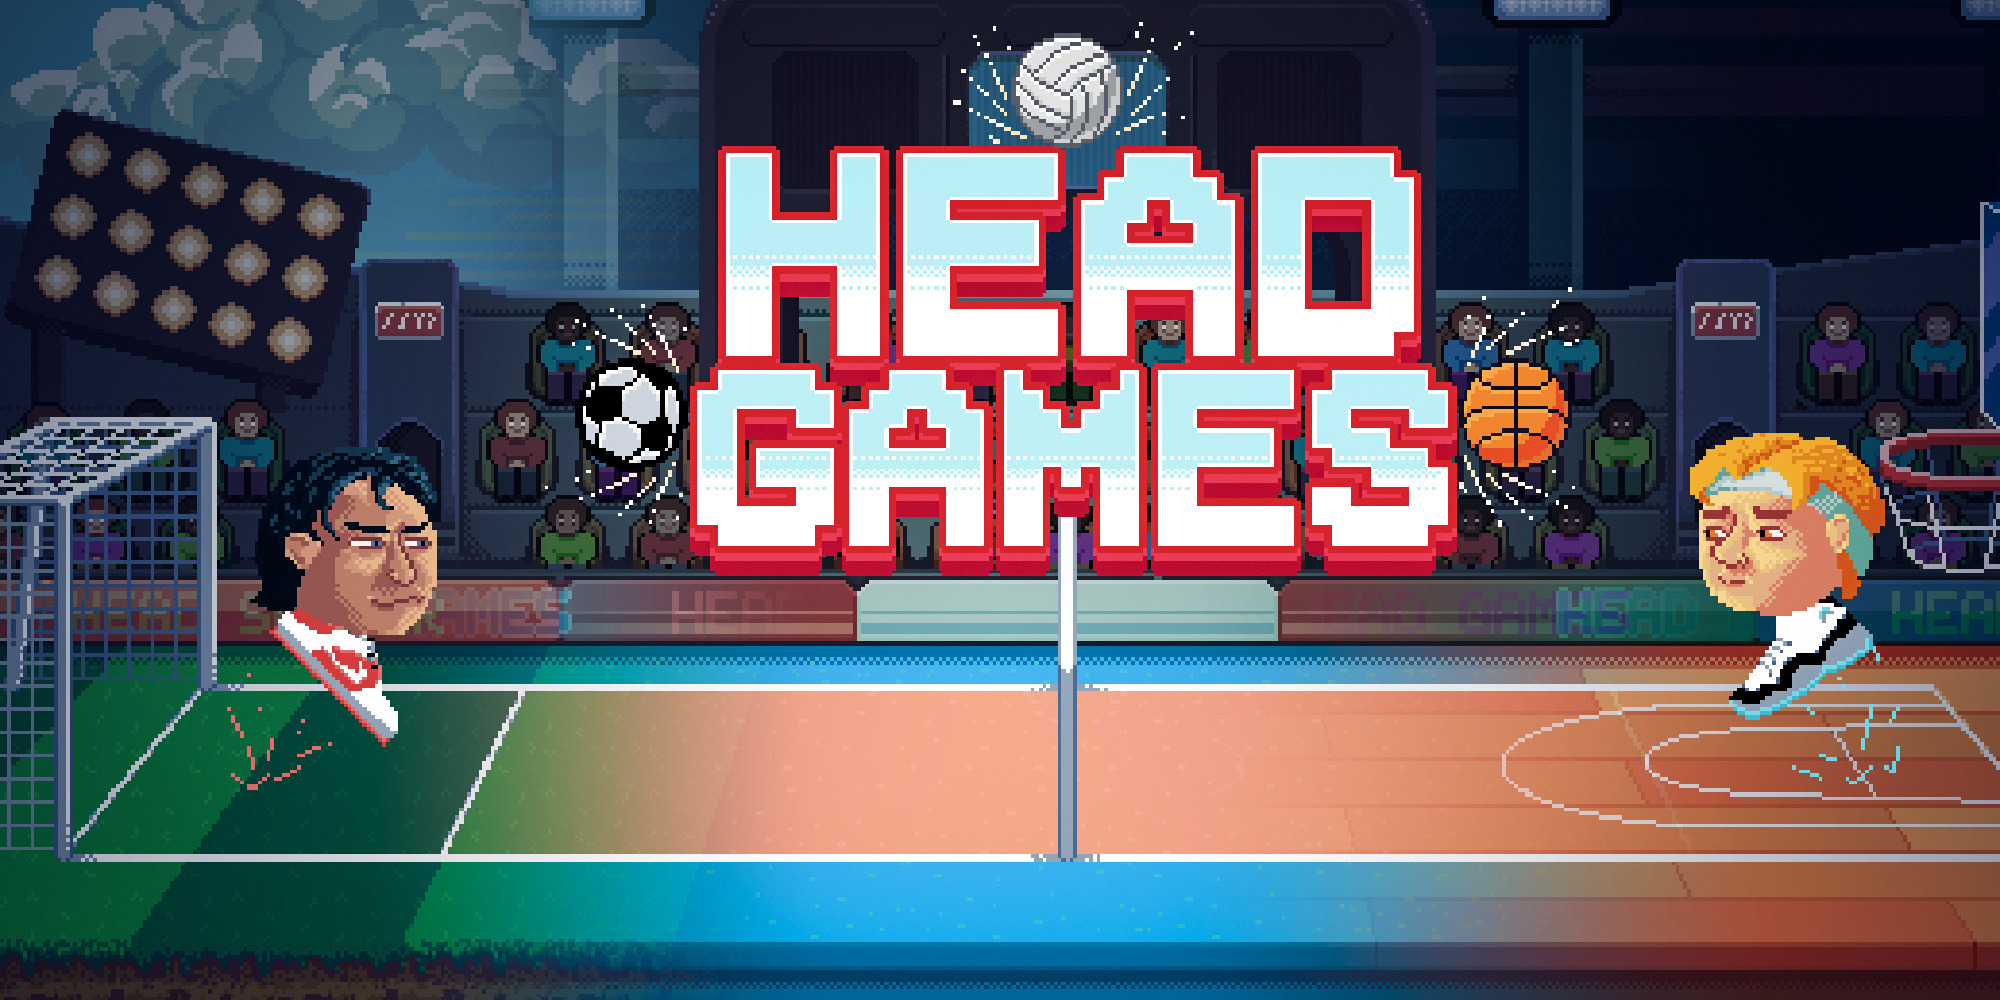 Head Soccer Unblocked - Score Goals with Your Head on